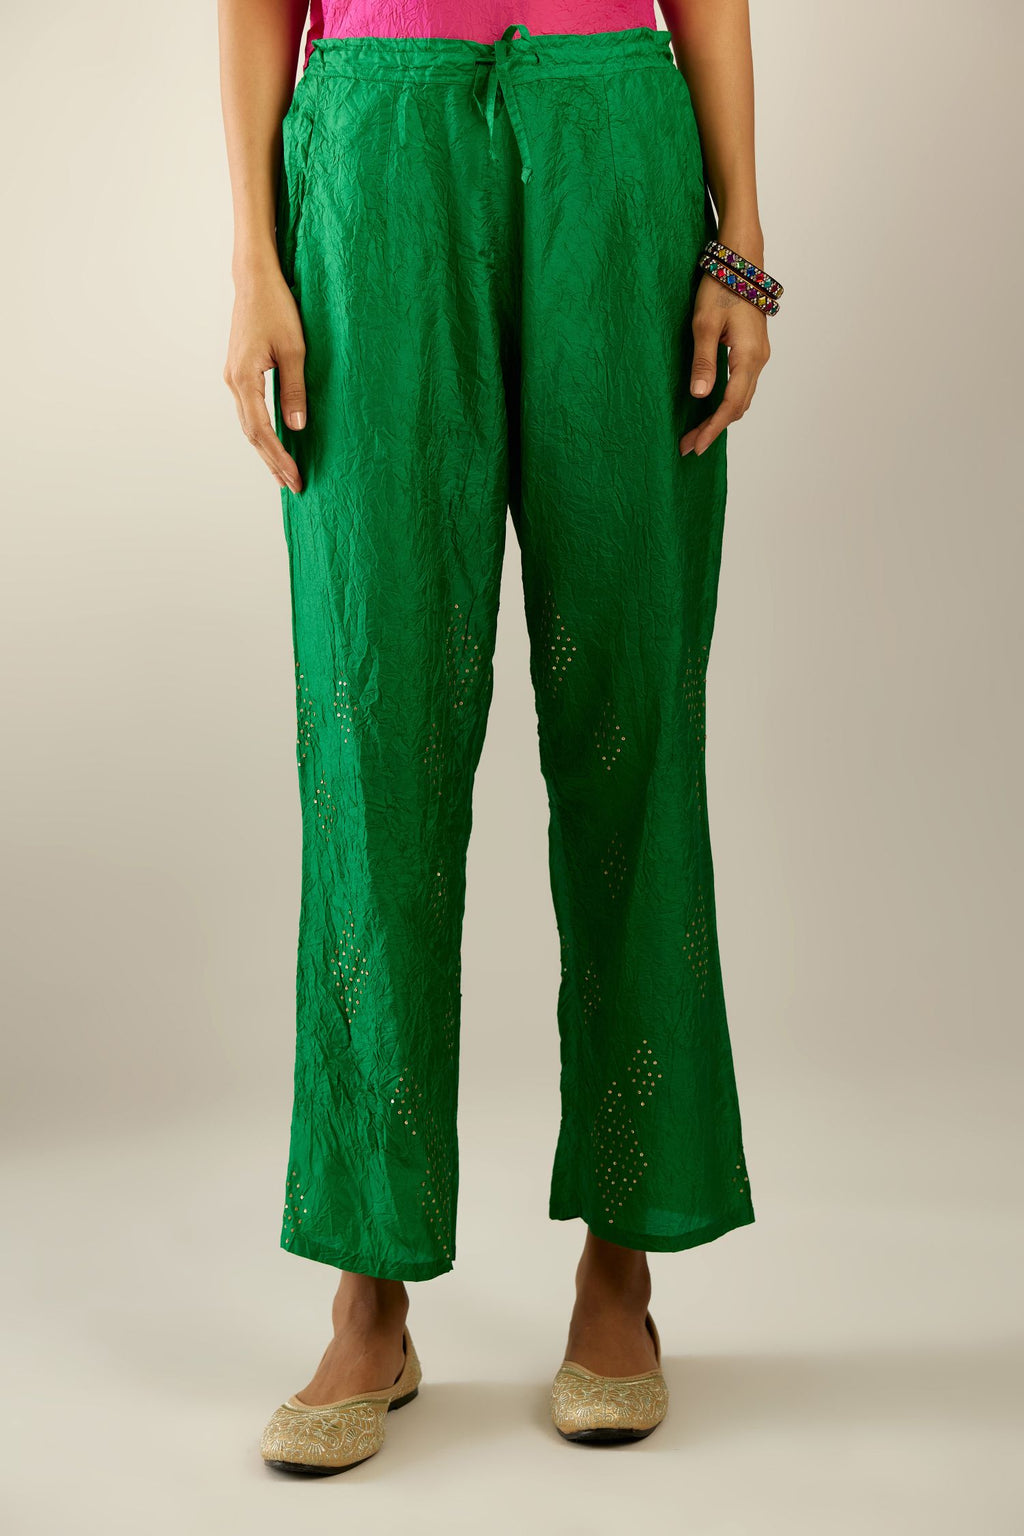 Jumia - These Silk Pants by Sally Bawa are Purple and are crafted out of raw  silk. These pants are designed to have a skinny fit.http://www.sabunta.com/ Silk-Pants-37999.html | Facebook